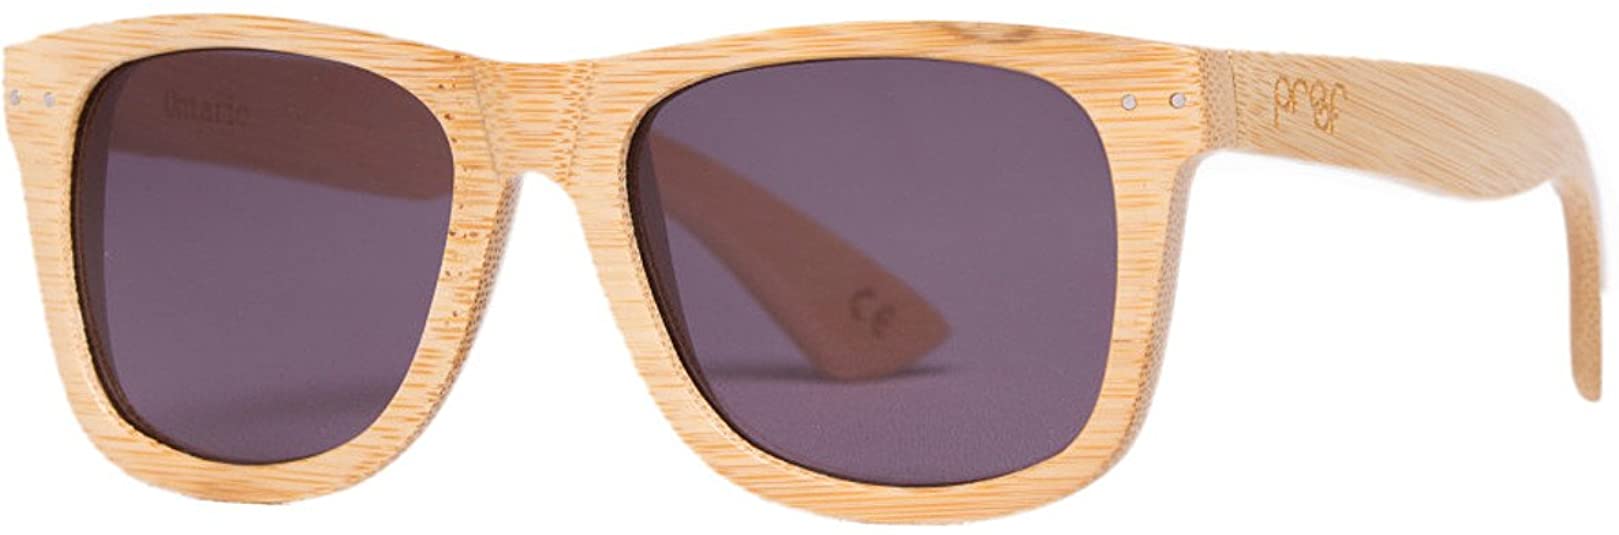 Proof Ontario Wood Handcrafted Water Resistant Stained Wooden Sunglasses